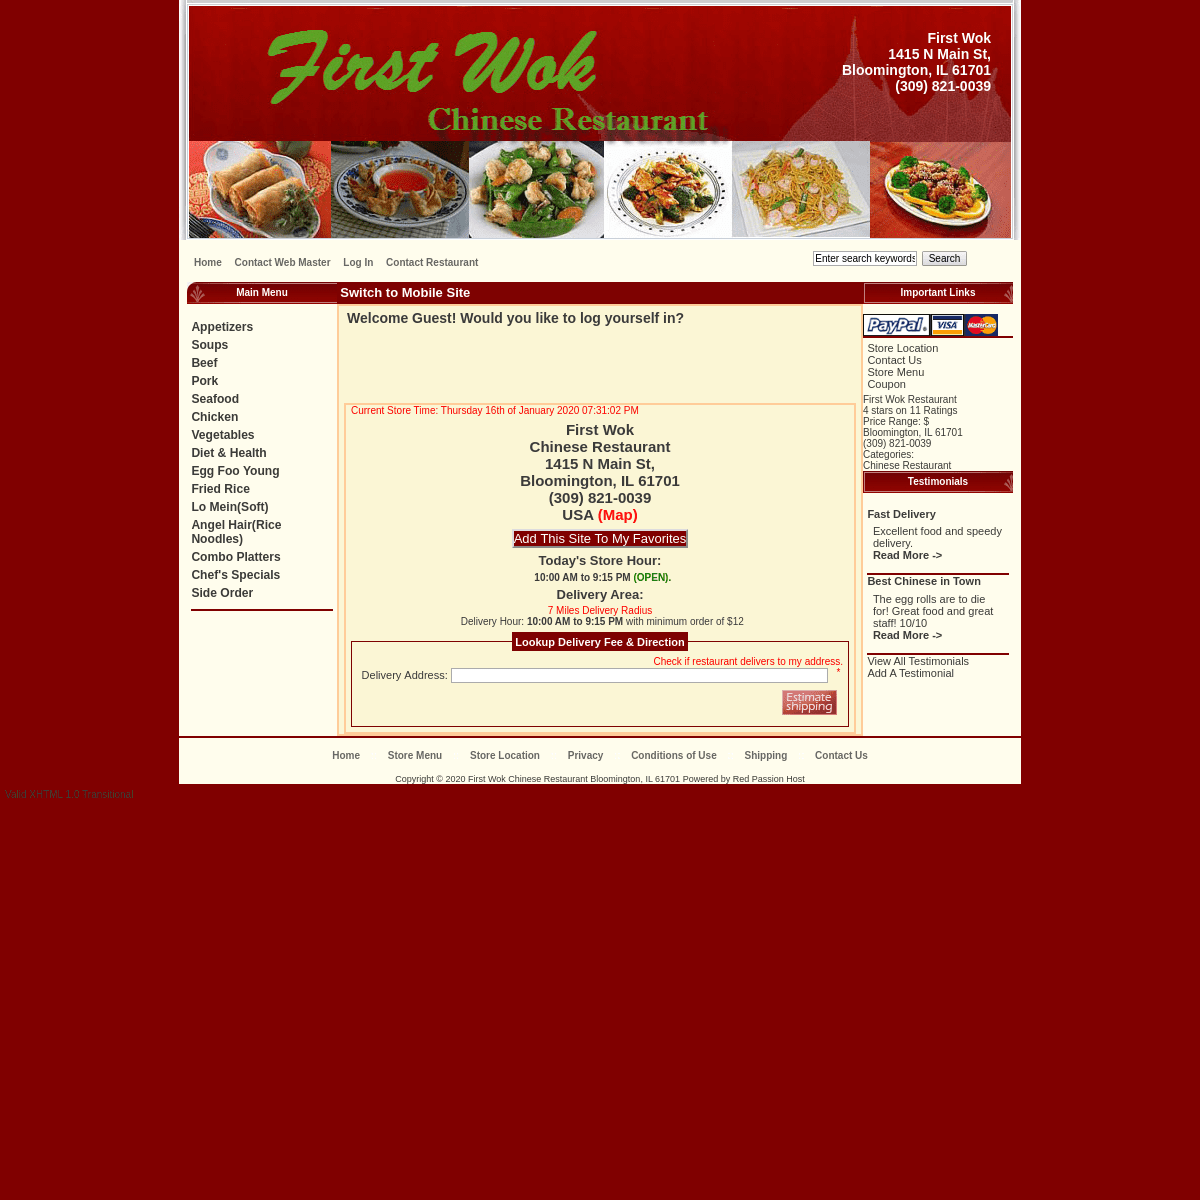 A complete backup of firstwokchinesefood.com